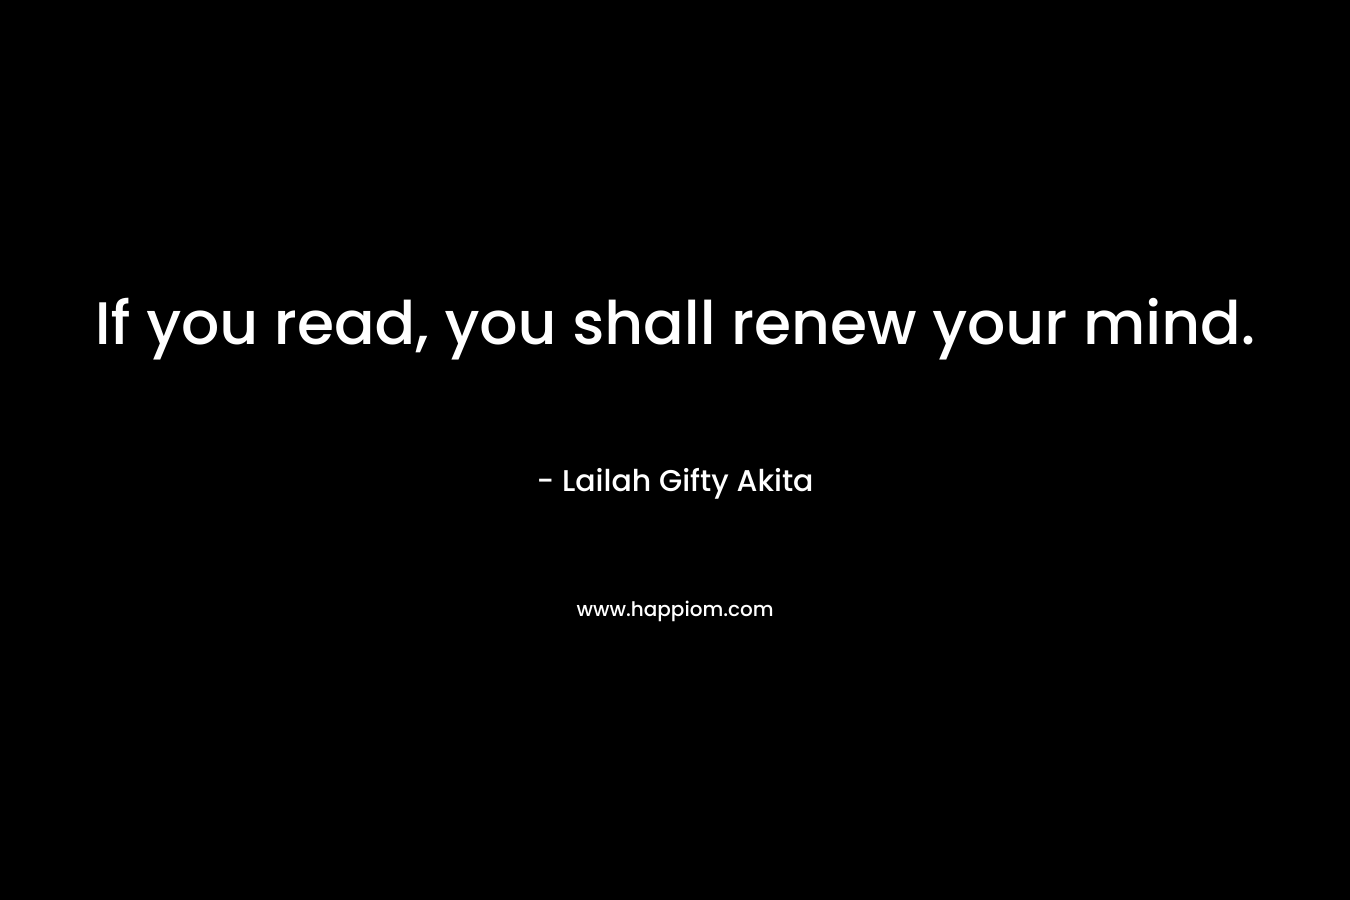 If you read, you shall renew your mind.